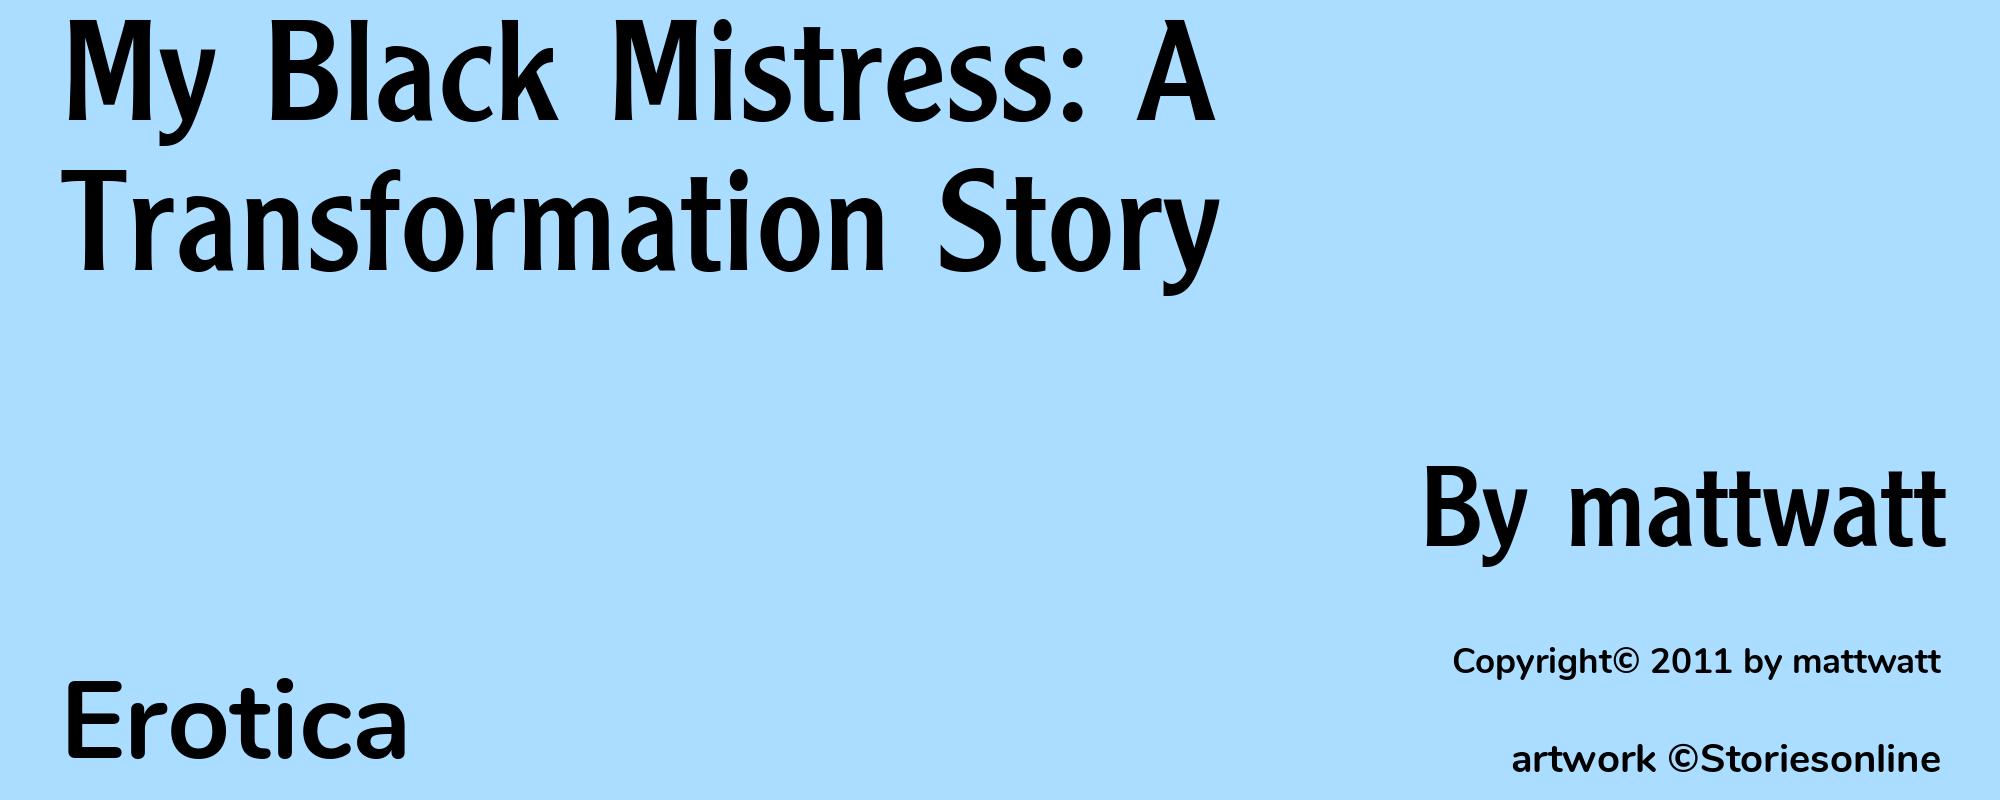 My Black Mistress: A Transformation Story - Cover